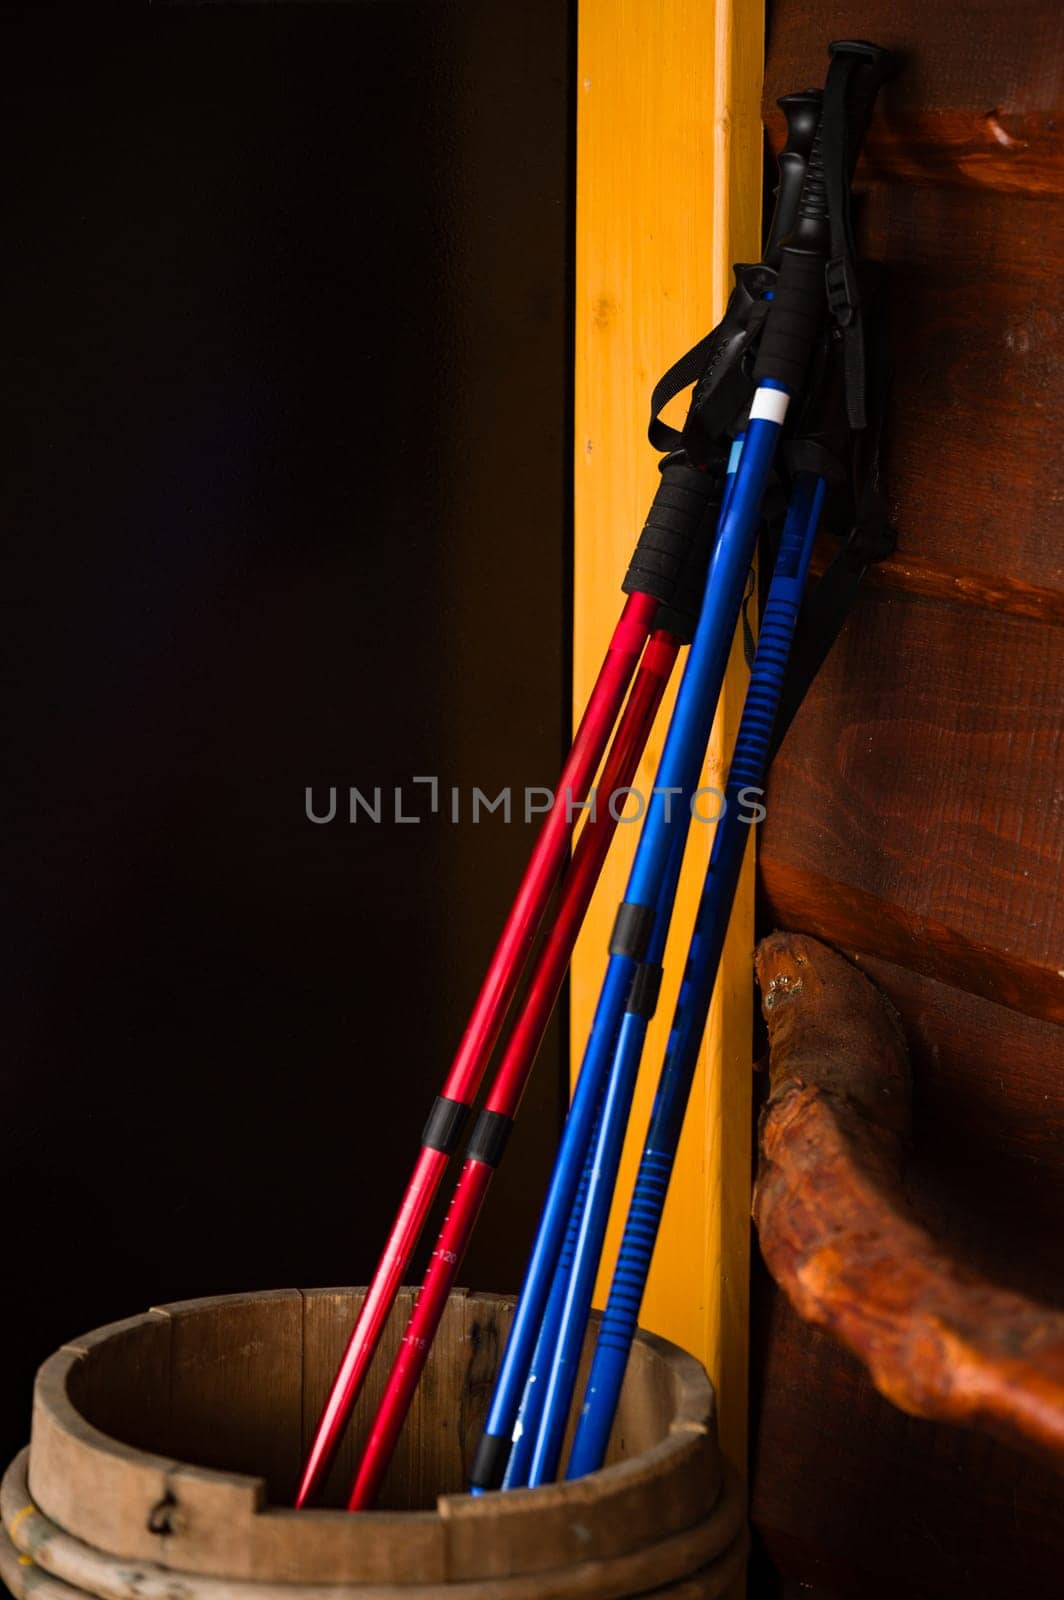 Three pairs of trekking poles are propped up in a barrel, poles for easy walking in the mountains.